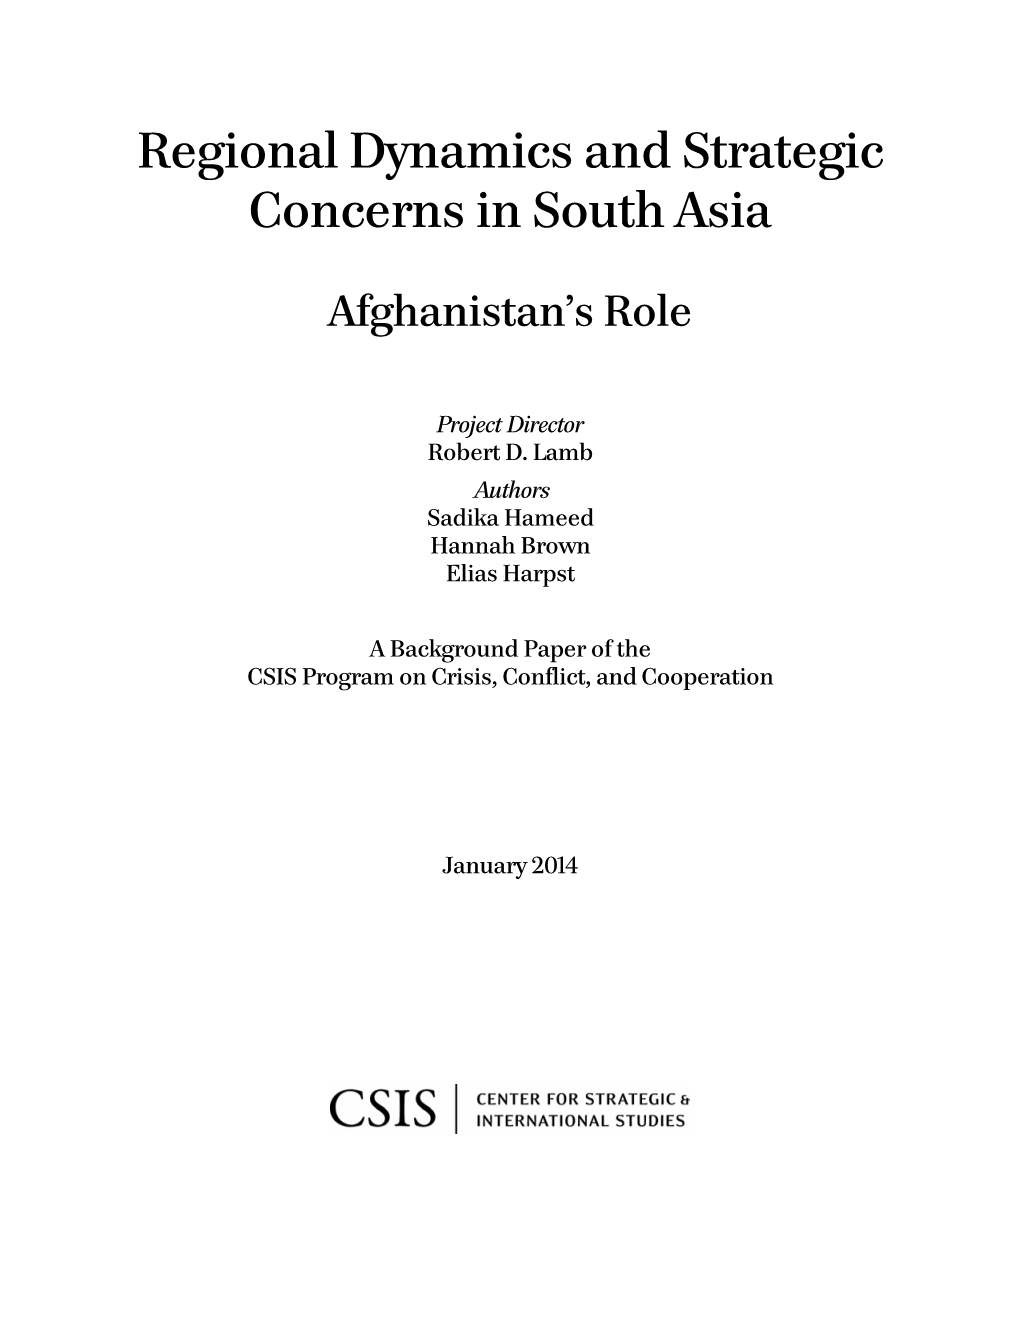 Regional Dynamics and Strategic Concerns in South Asia: Afghanistan's Role